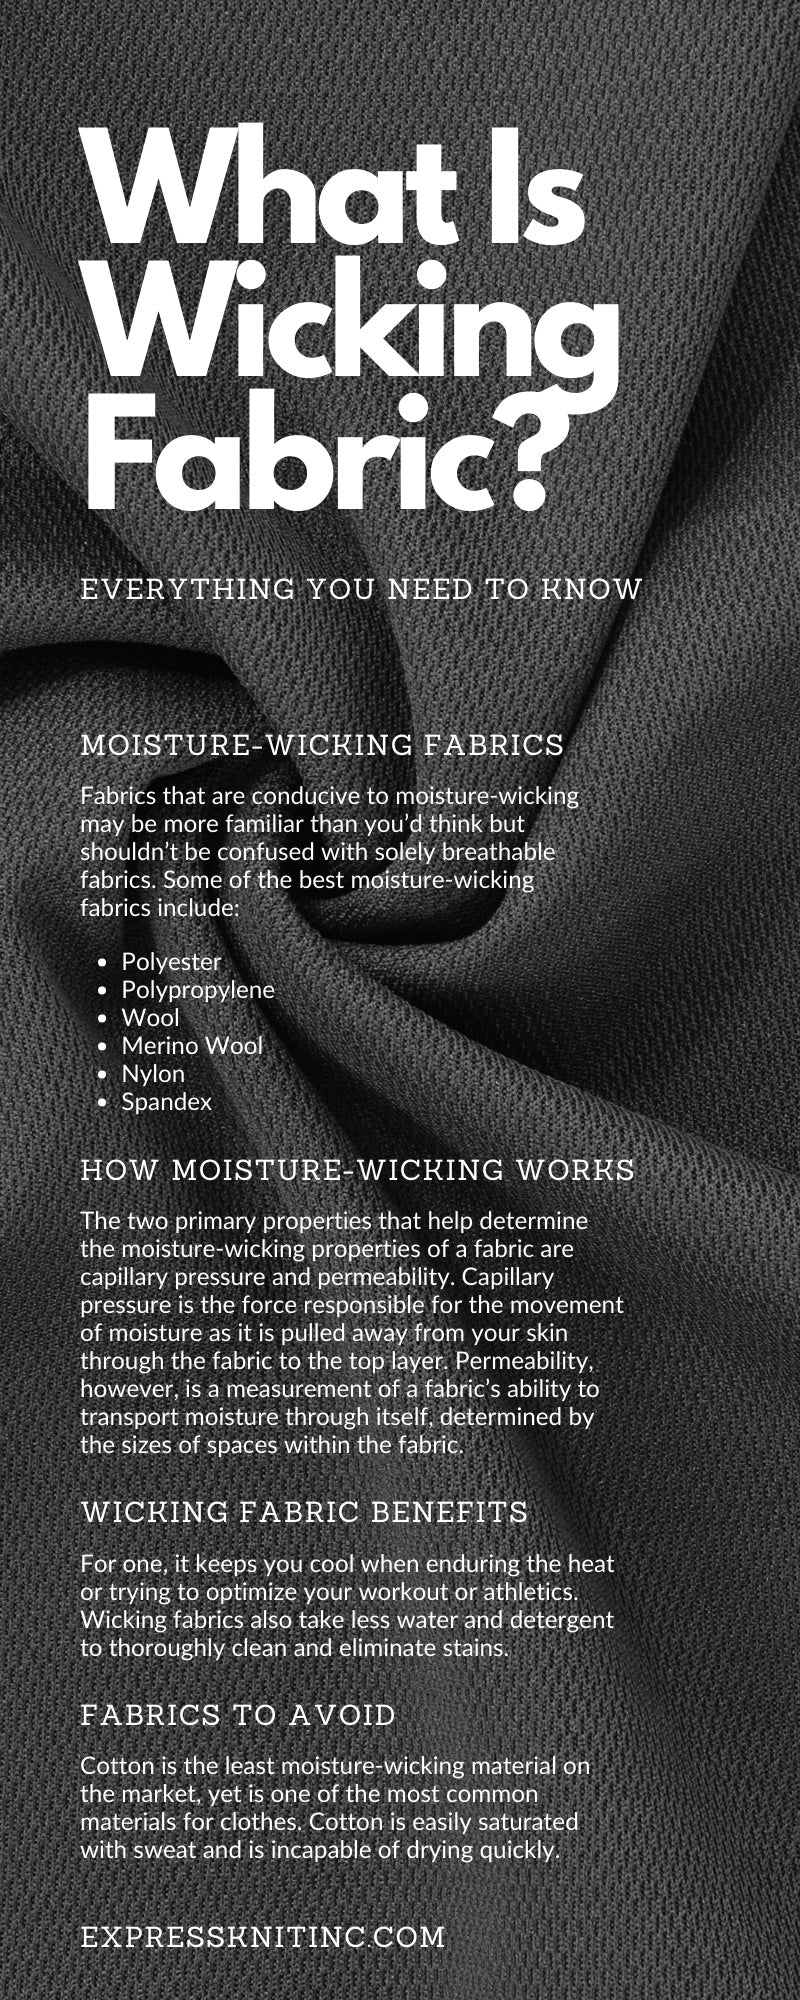 What Does Moisture-Wicking Mean?